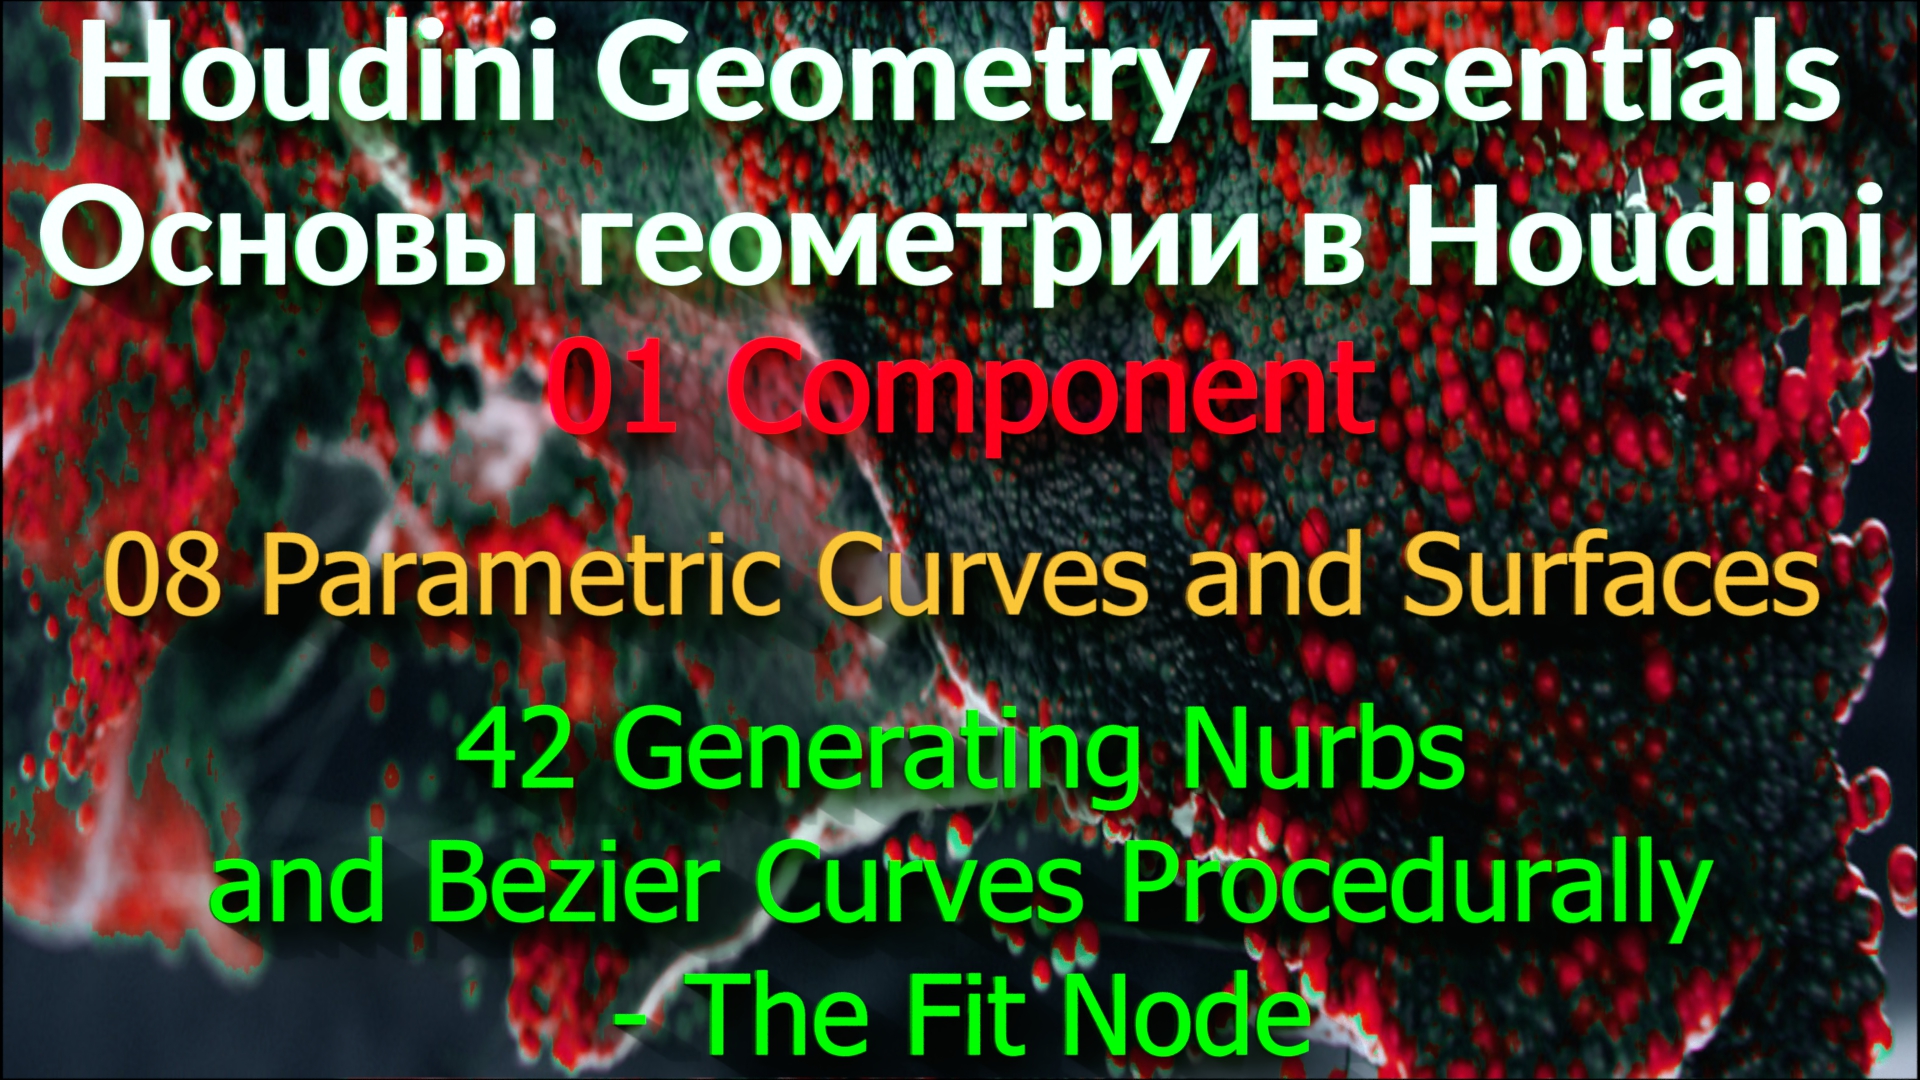 01_08_42. Generating Nurbs and Bezier Curves Procedurally - The Fit Node